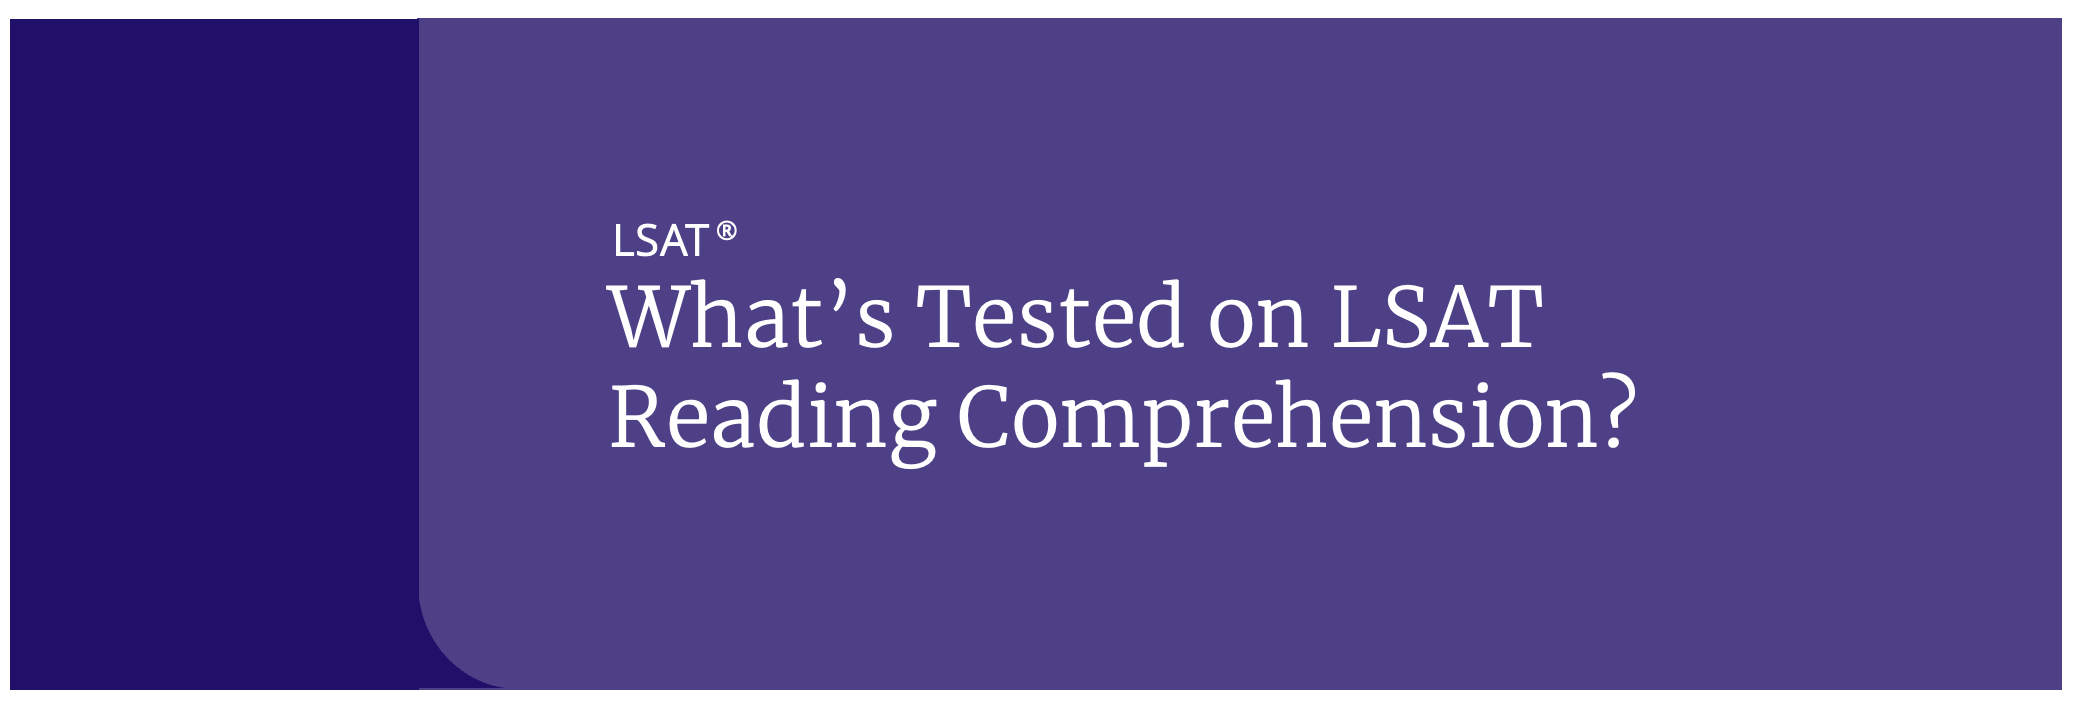 lsat-reading-comprehension-tips-strategies-wrong-answers-kaplan